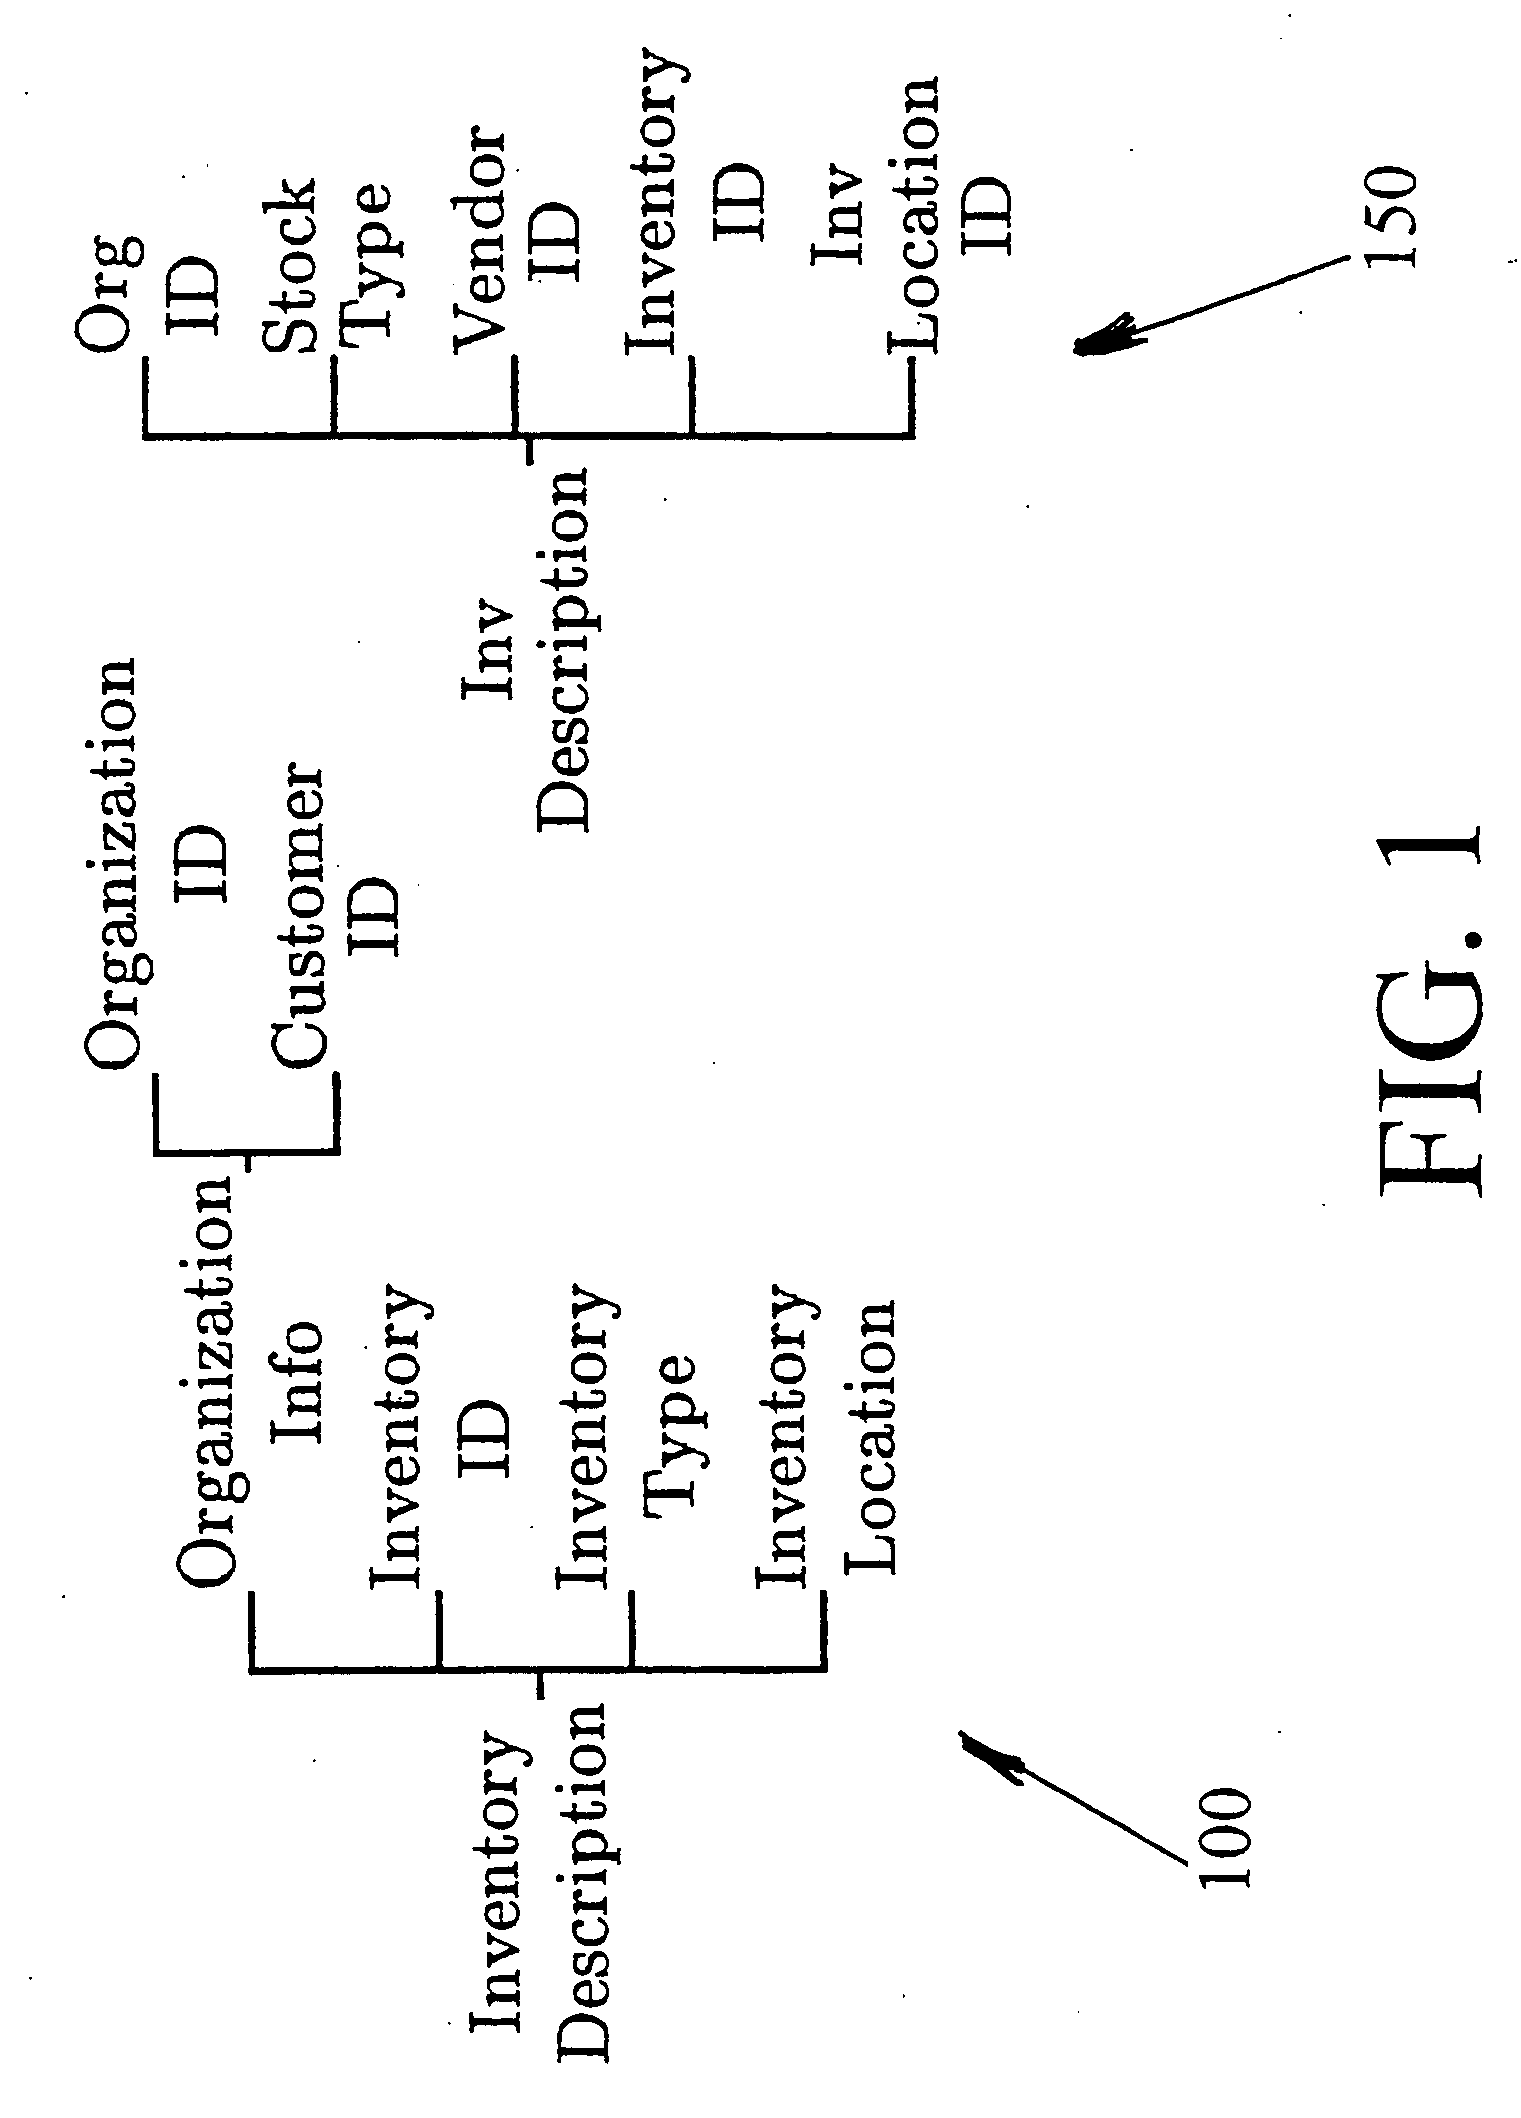 Method and apparatus for semantic search of schema repositories